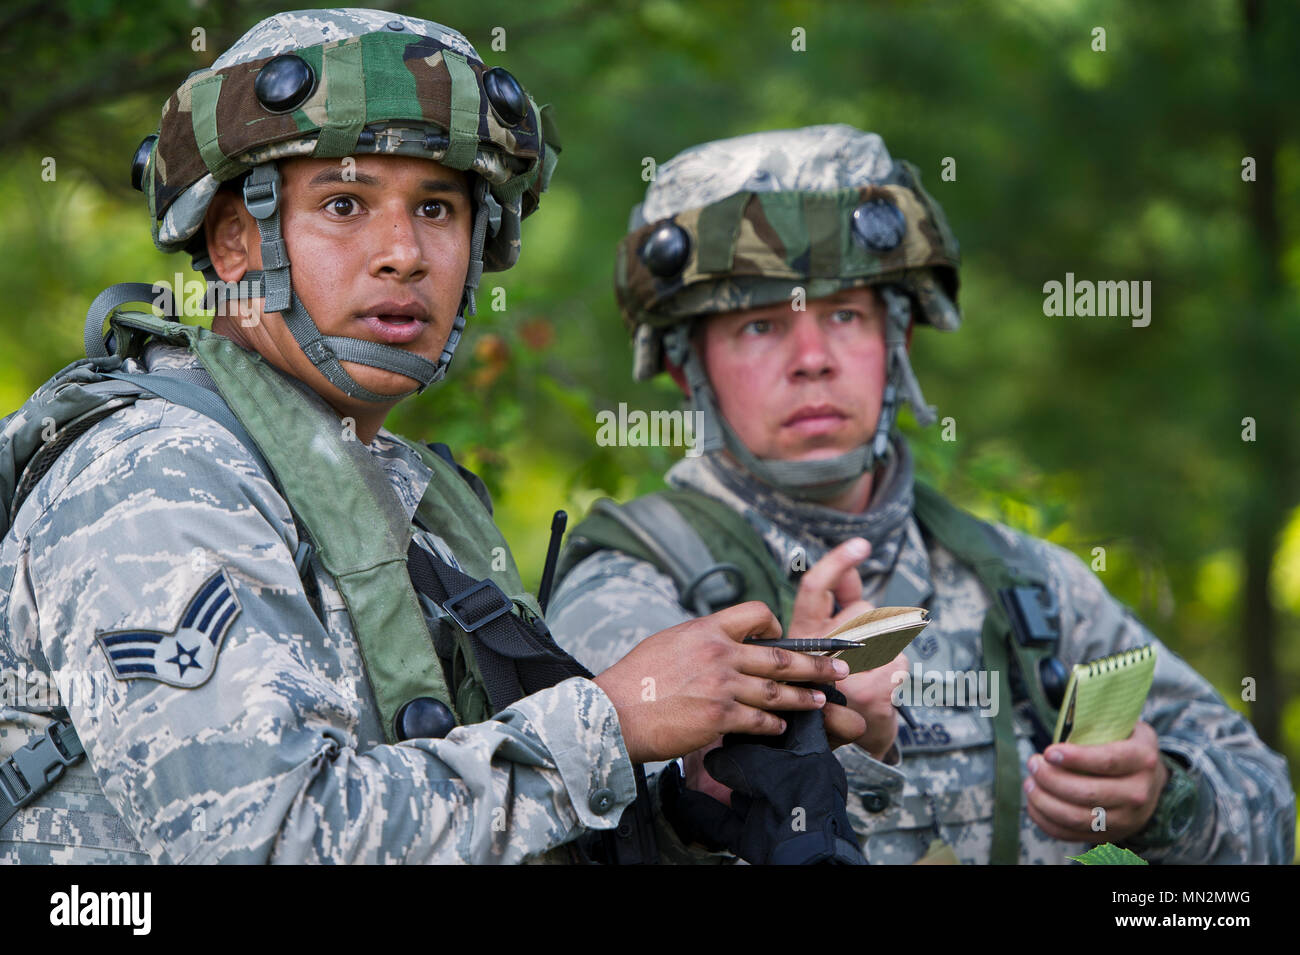 U.S. Air Force Senior Airman Sergio Frasco, left, and Staff Sgt. Farrell Bowers, both assigned to the 434th Security Forces Squadron, Grissom AFB, Ind., maneuver through the woods as they participate in a tactical engagement simulation drill during exercise Patriot Warrior at Young Air Assault Strip, Fort McCoy, Wis., Aug. 18, 2017. More than 600 Reserve Citizen Airmen and over 10,000 soldiers, sailors, Marines and international partners converged on the state of Wisconsin to support a range of interlinked exercises including Patriot Warrior, Global Medic, CSTX, Diamond Saber, and Mortuary Aff Stock Photo